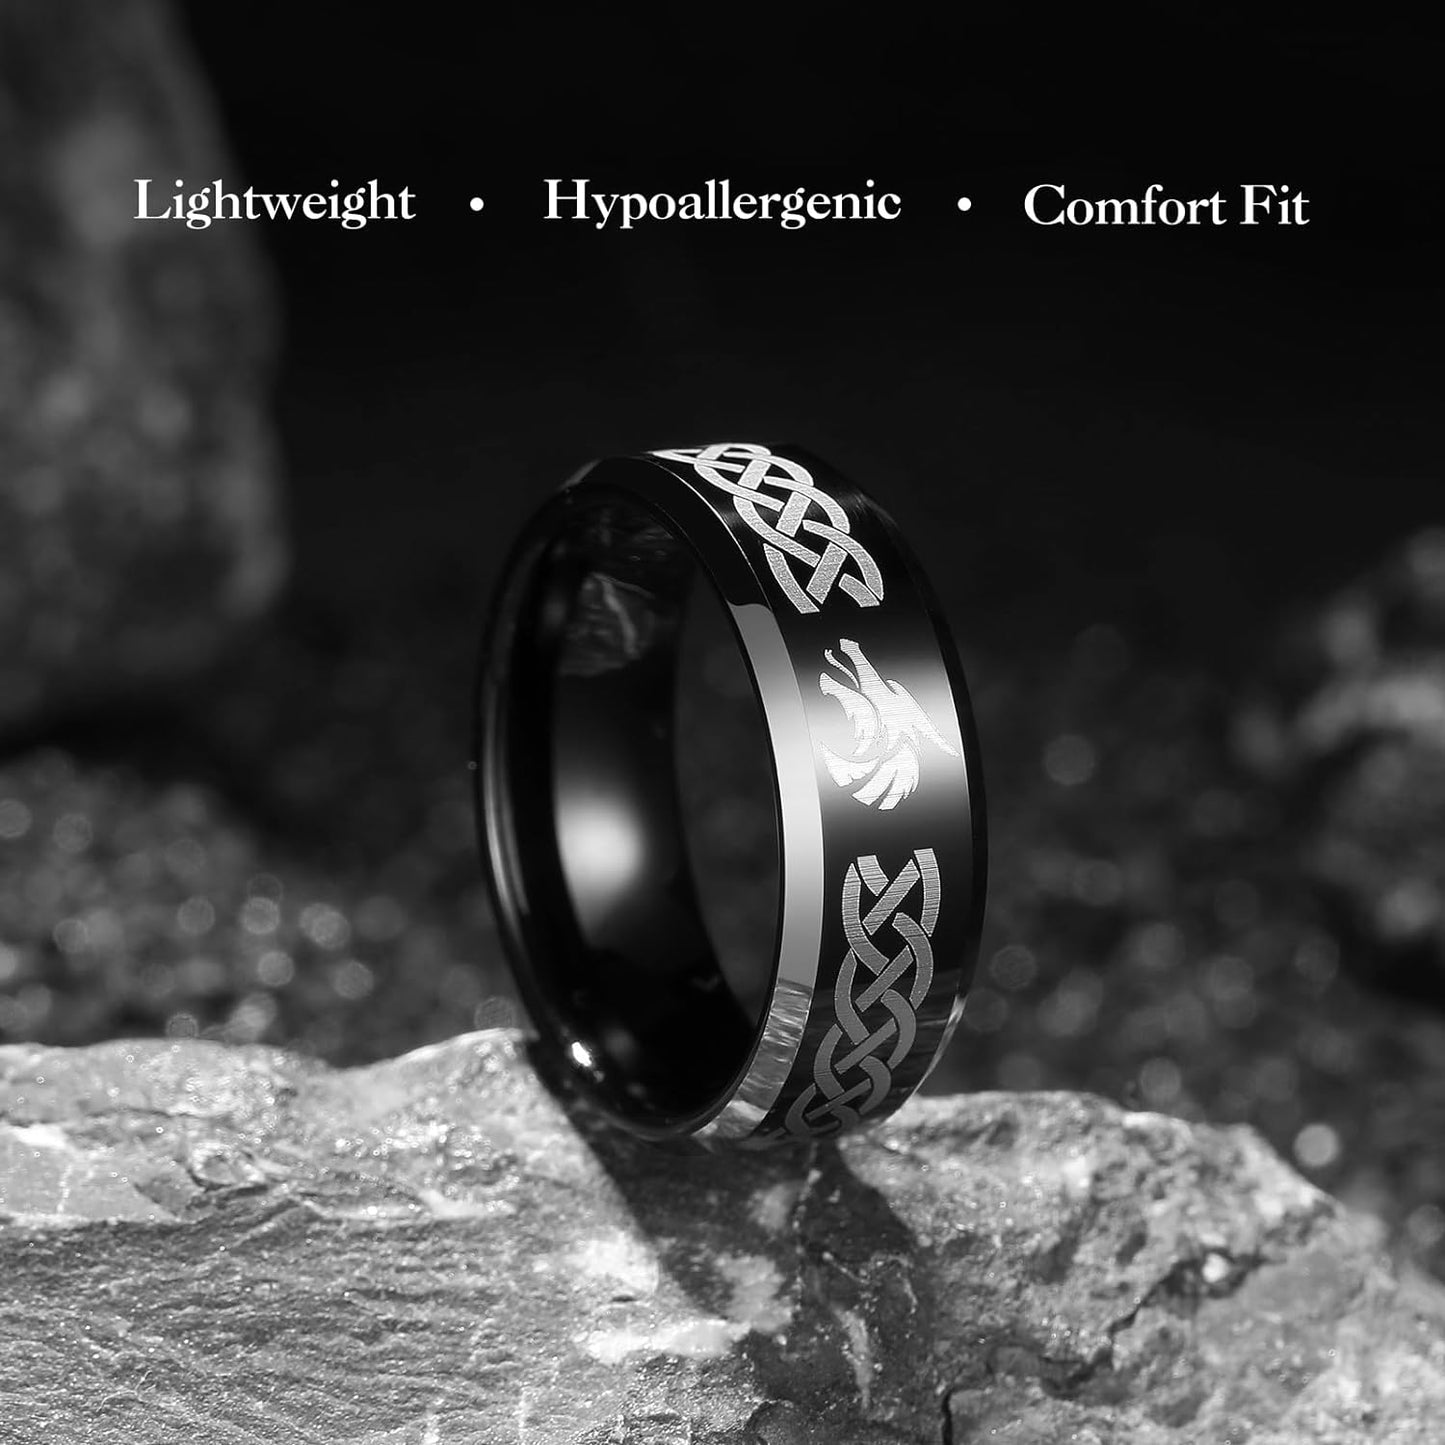 King Will 8mm Black/Silver/Blue Mens Tungsten Carbide Ring Laser Celtic Knot/Wolf Head/Dragon Polish Edge Wedding Band Size 7-14